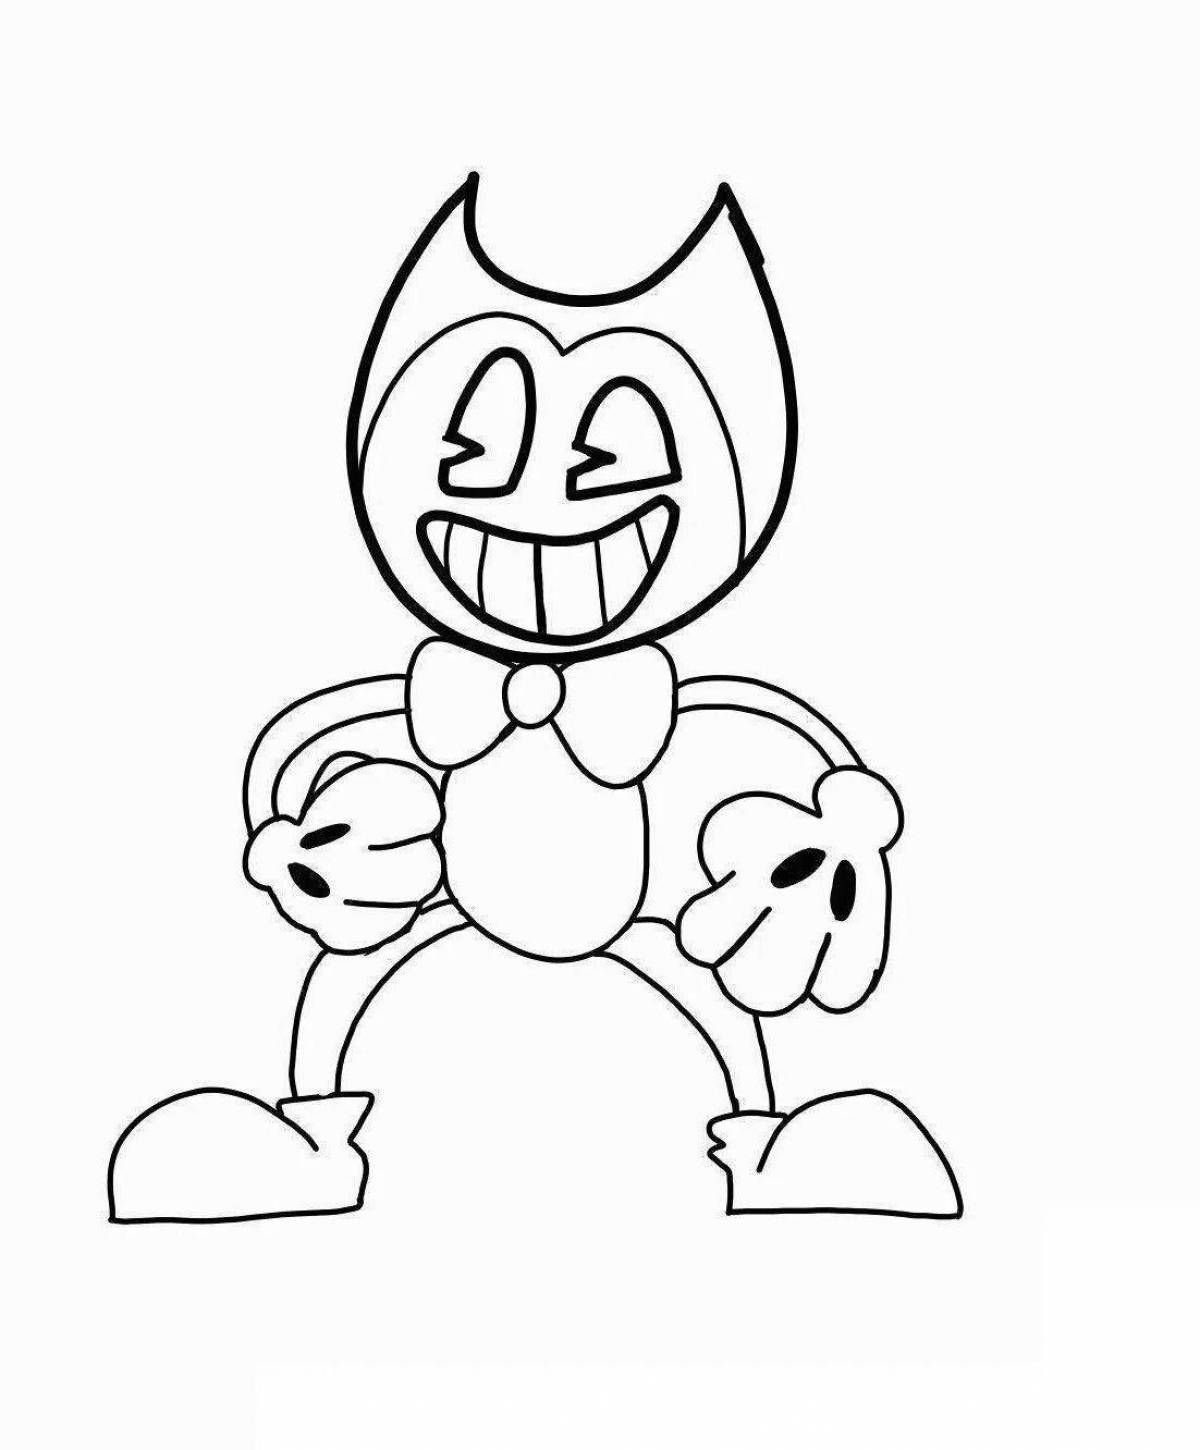 Chilling bendy coloring page